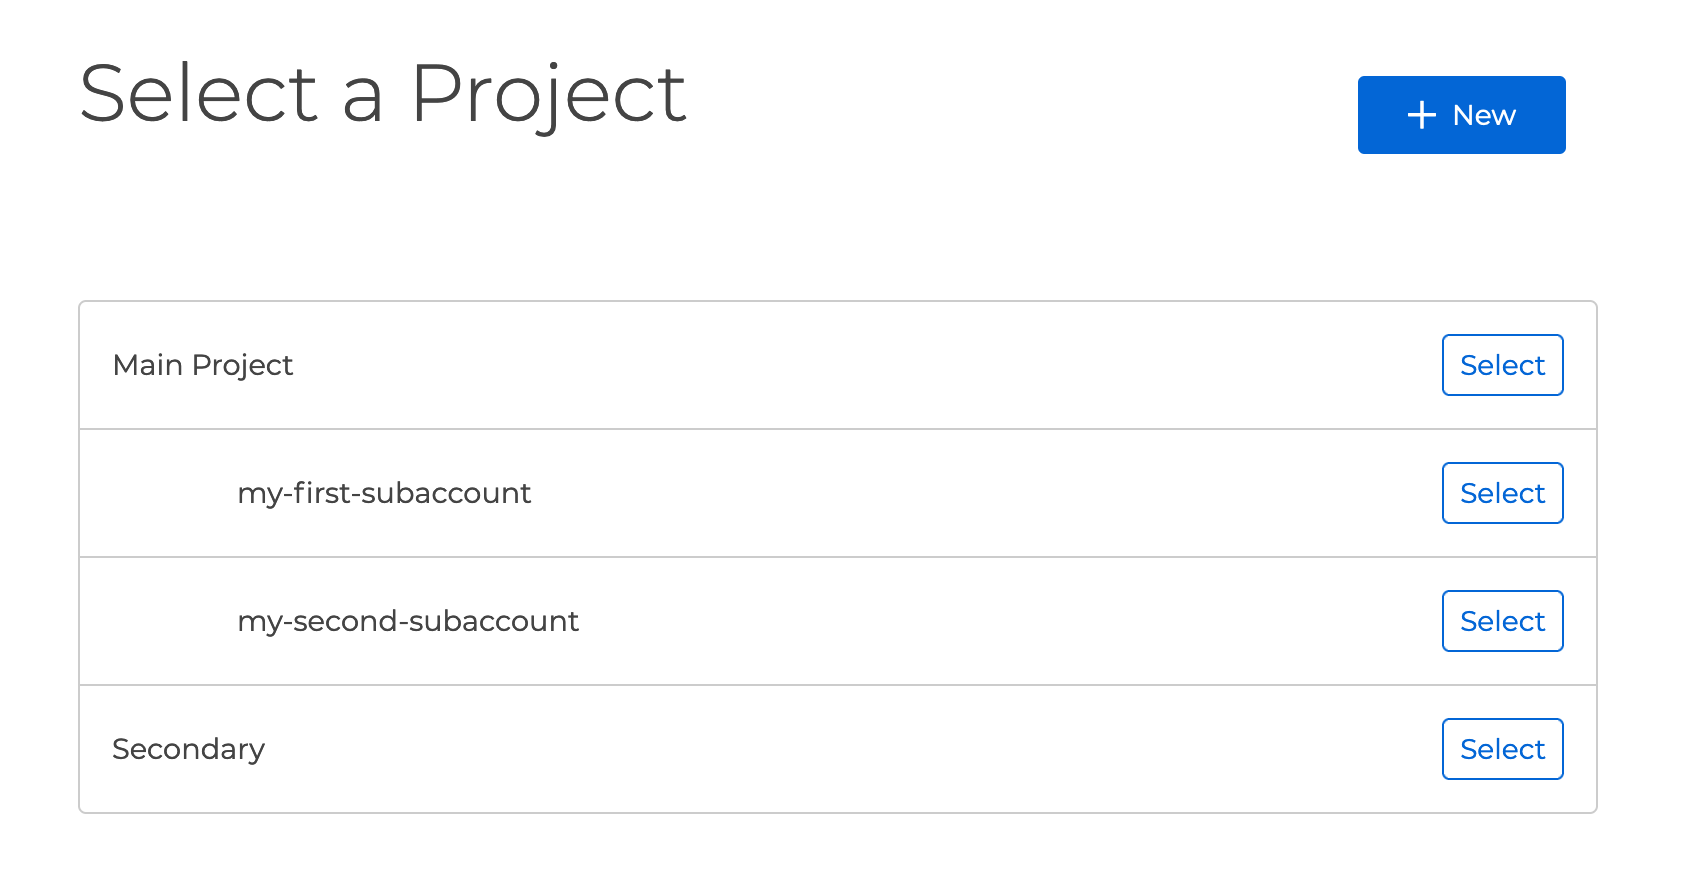 You can select a project or subproject from the UI of your [SignalWire Space](https://signalwire.com/signin). In this example, the "Main Project" owns two subprojects.